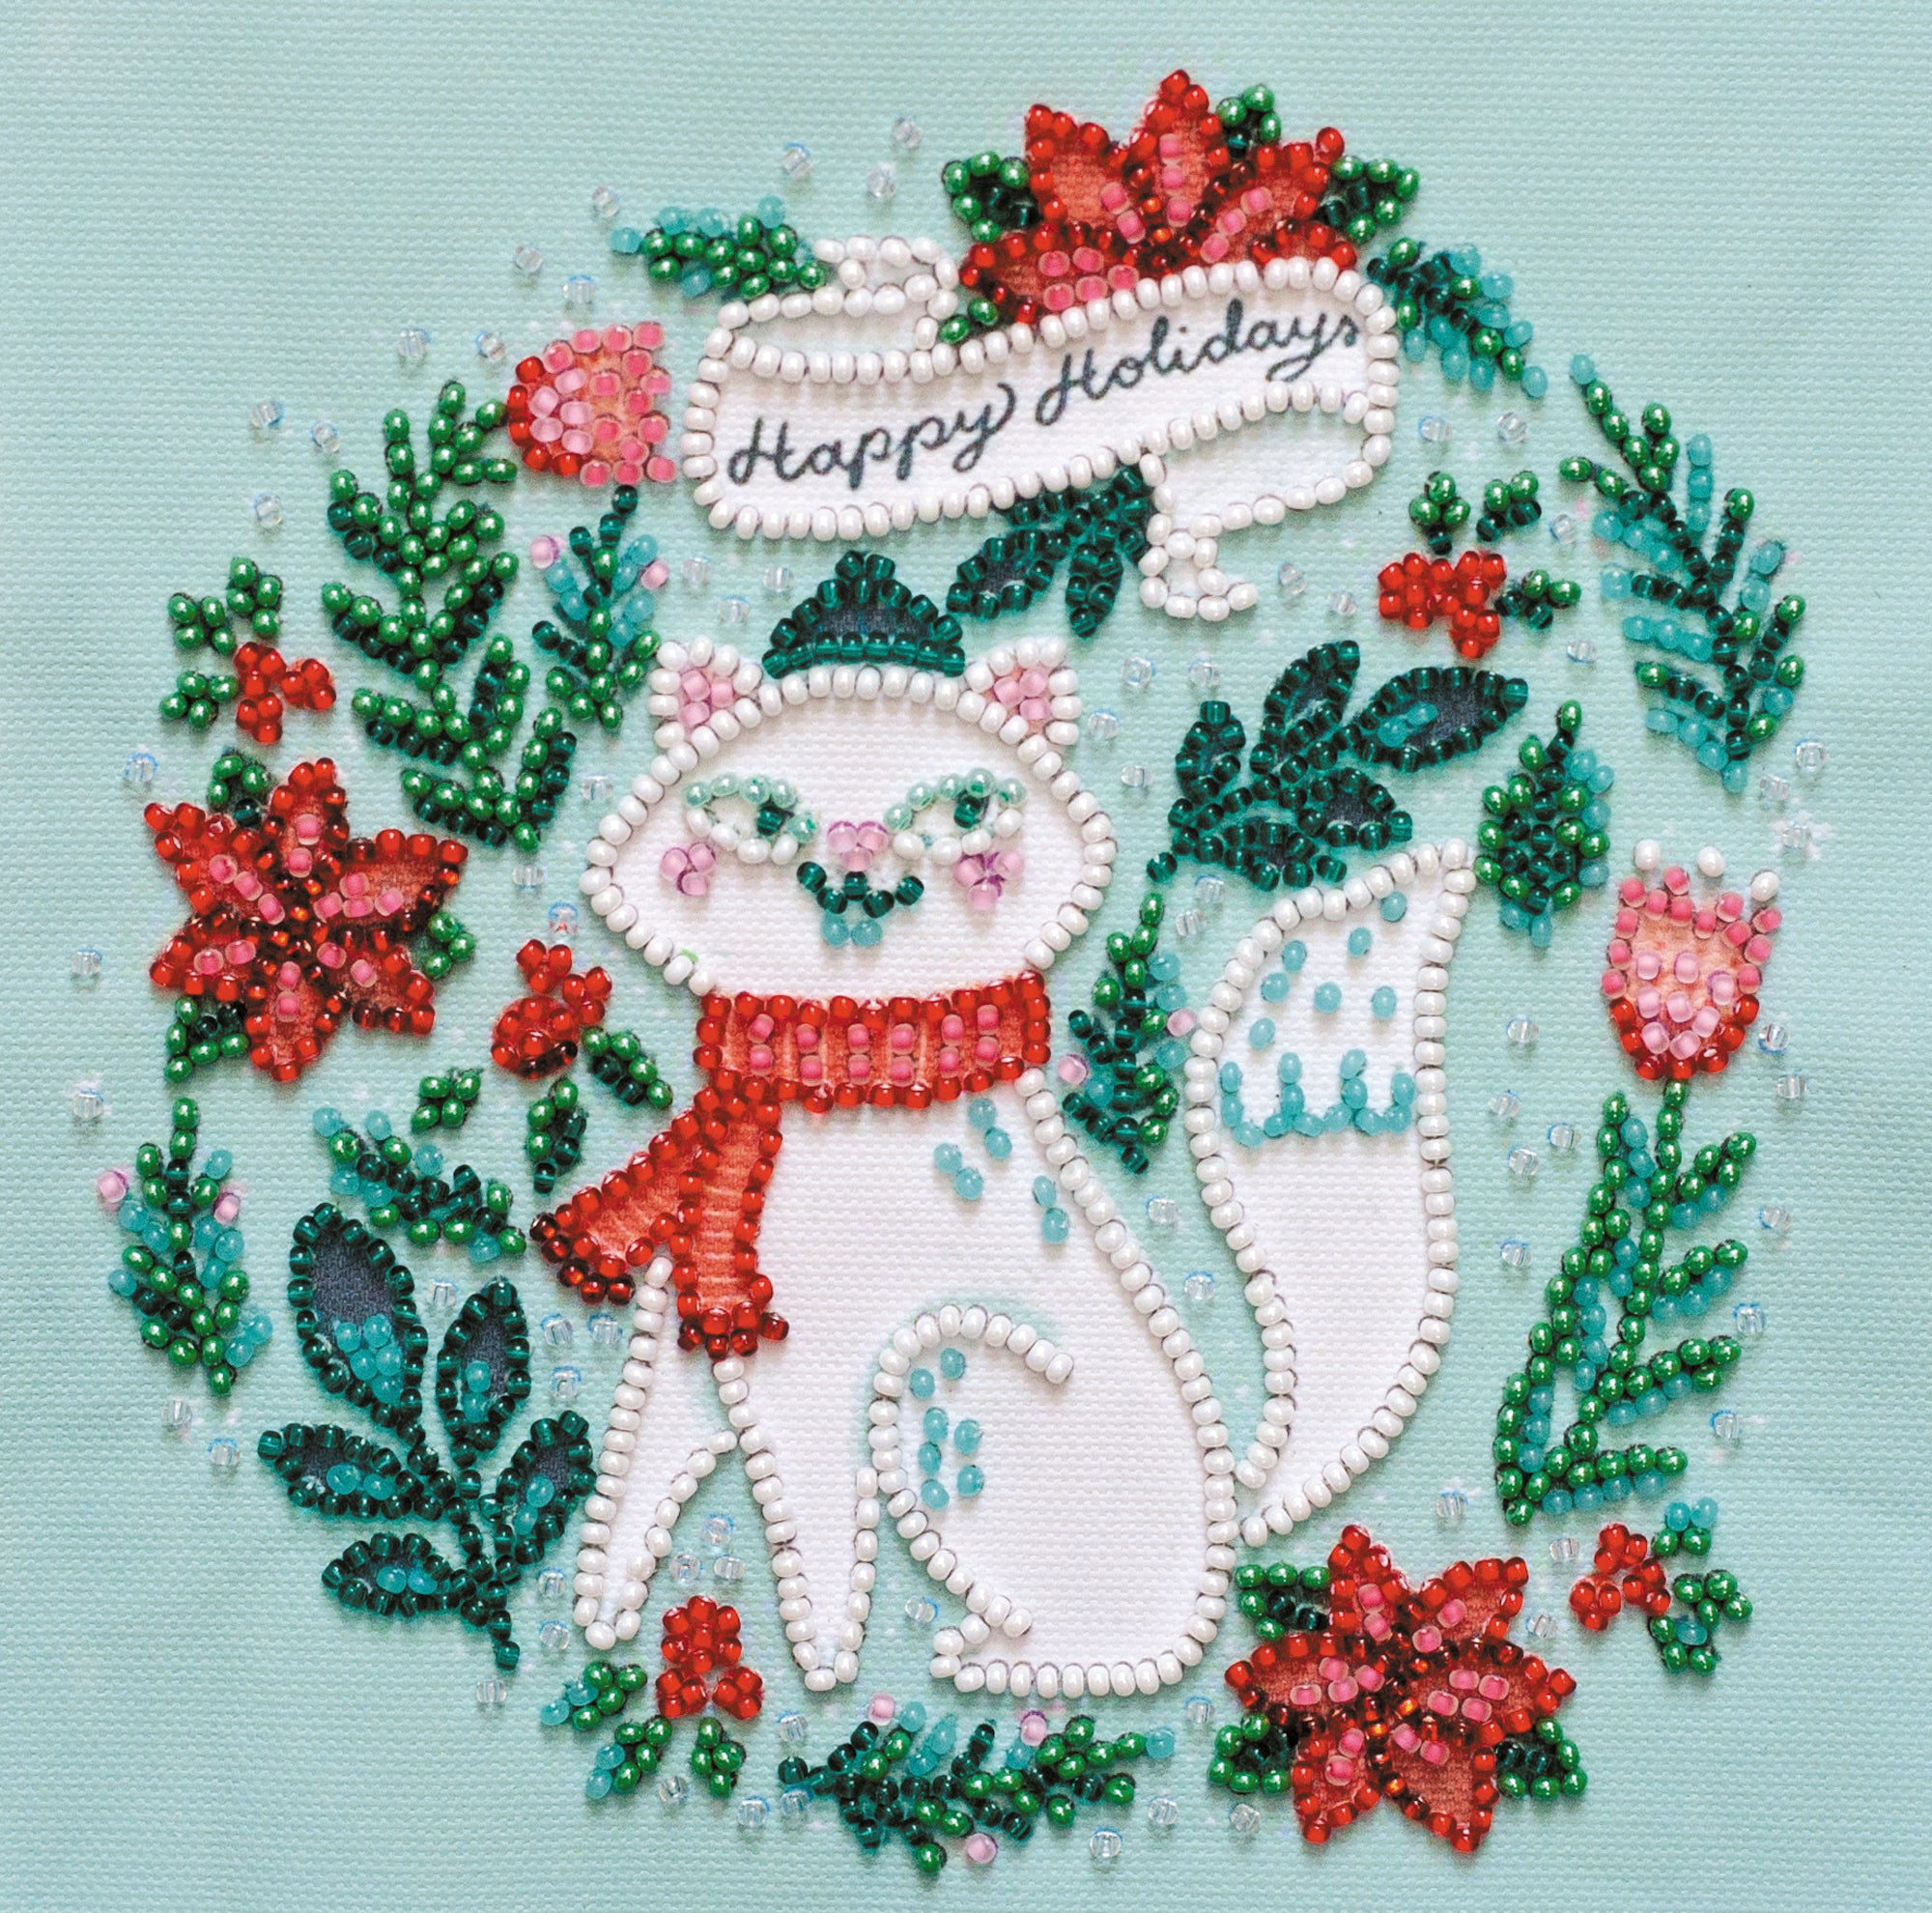 DIY Bead Embroidery Kit Kitty in a scarf 5.9x5.9 / 15.0x15.0 cm